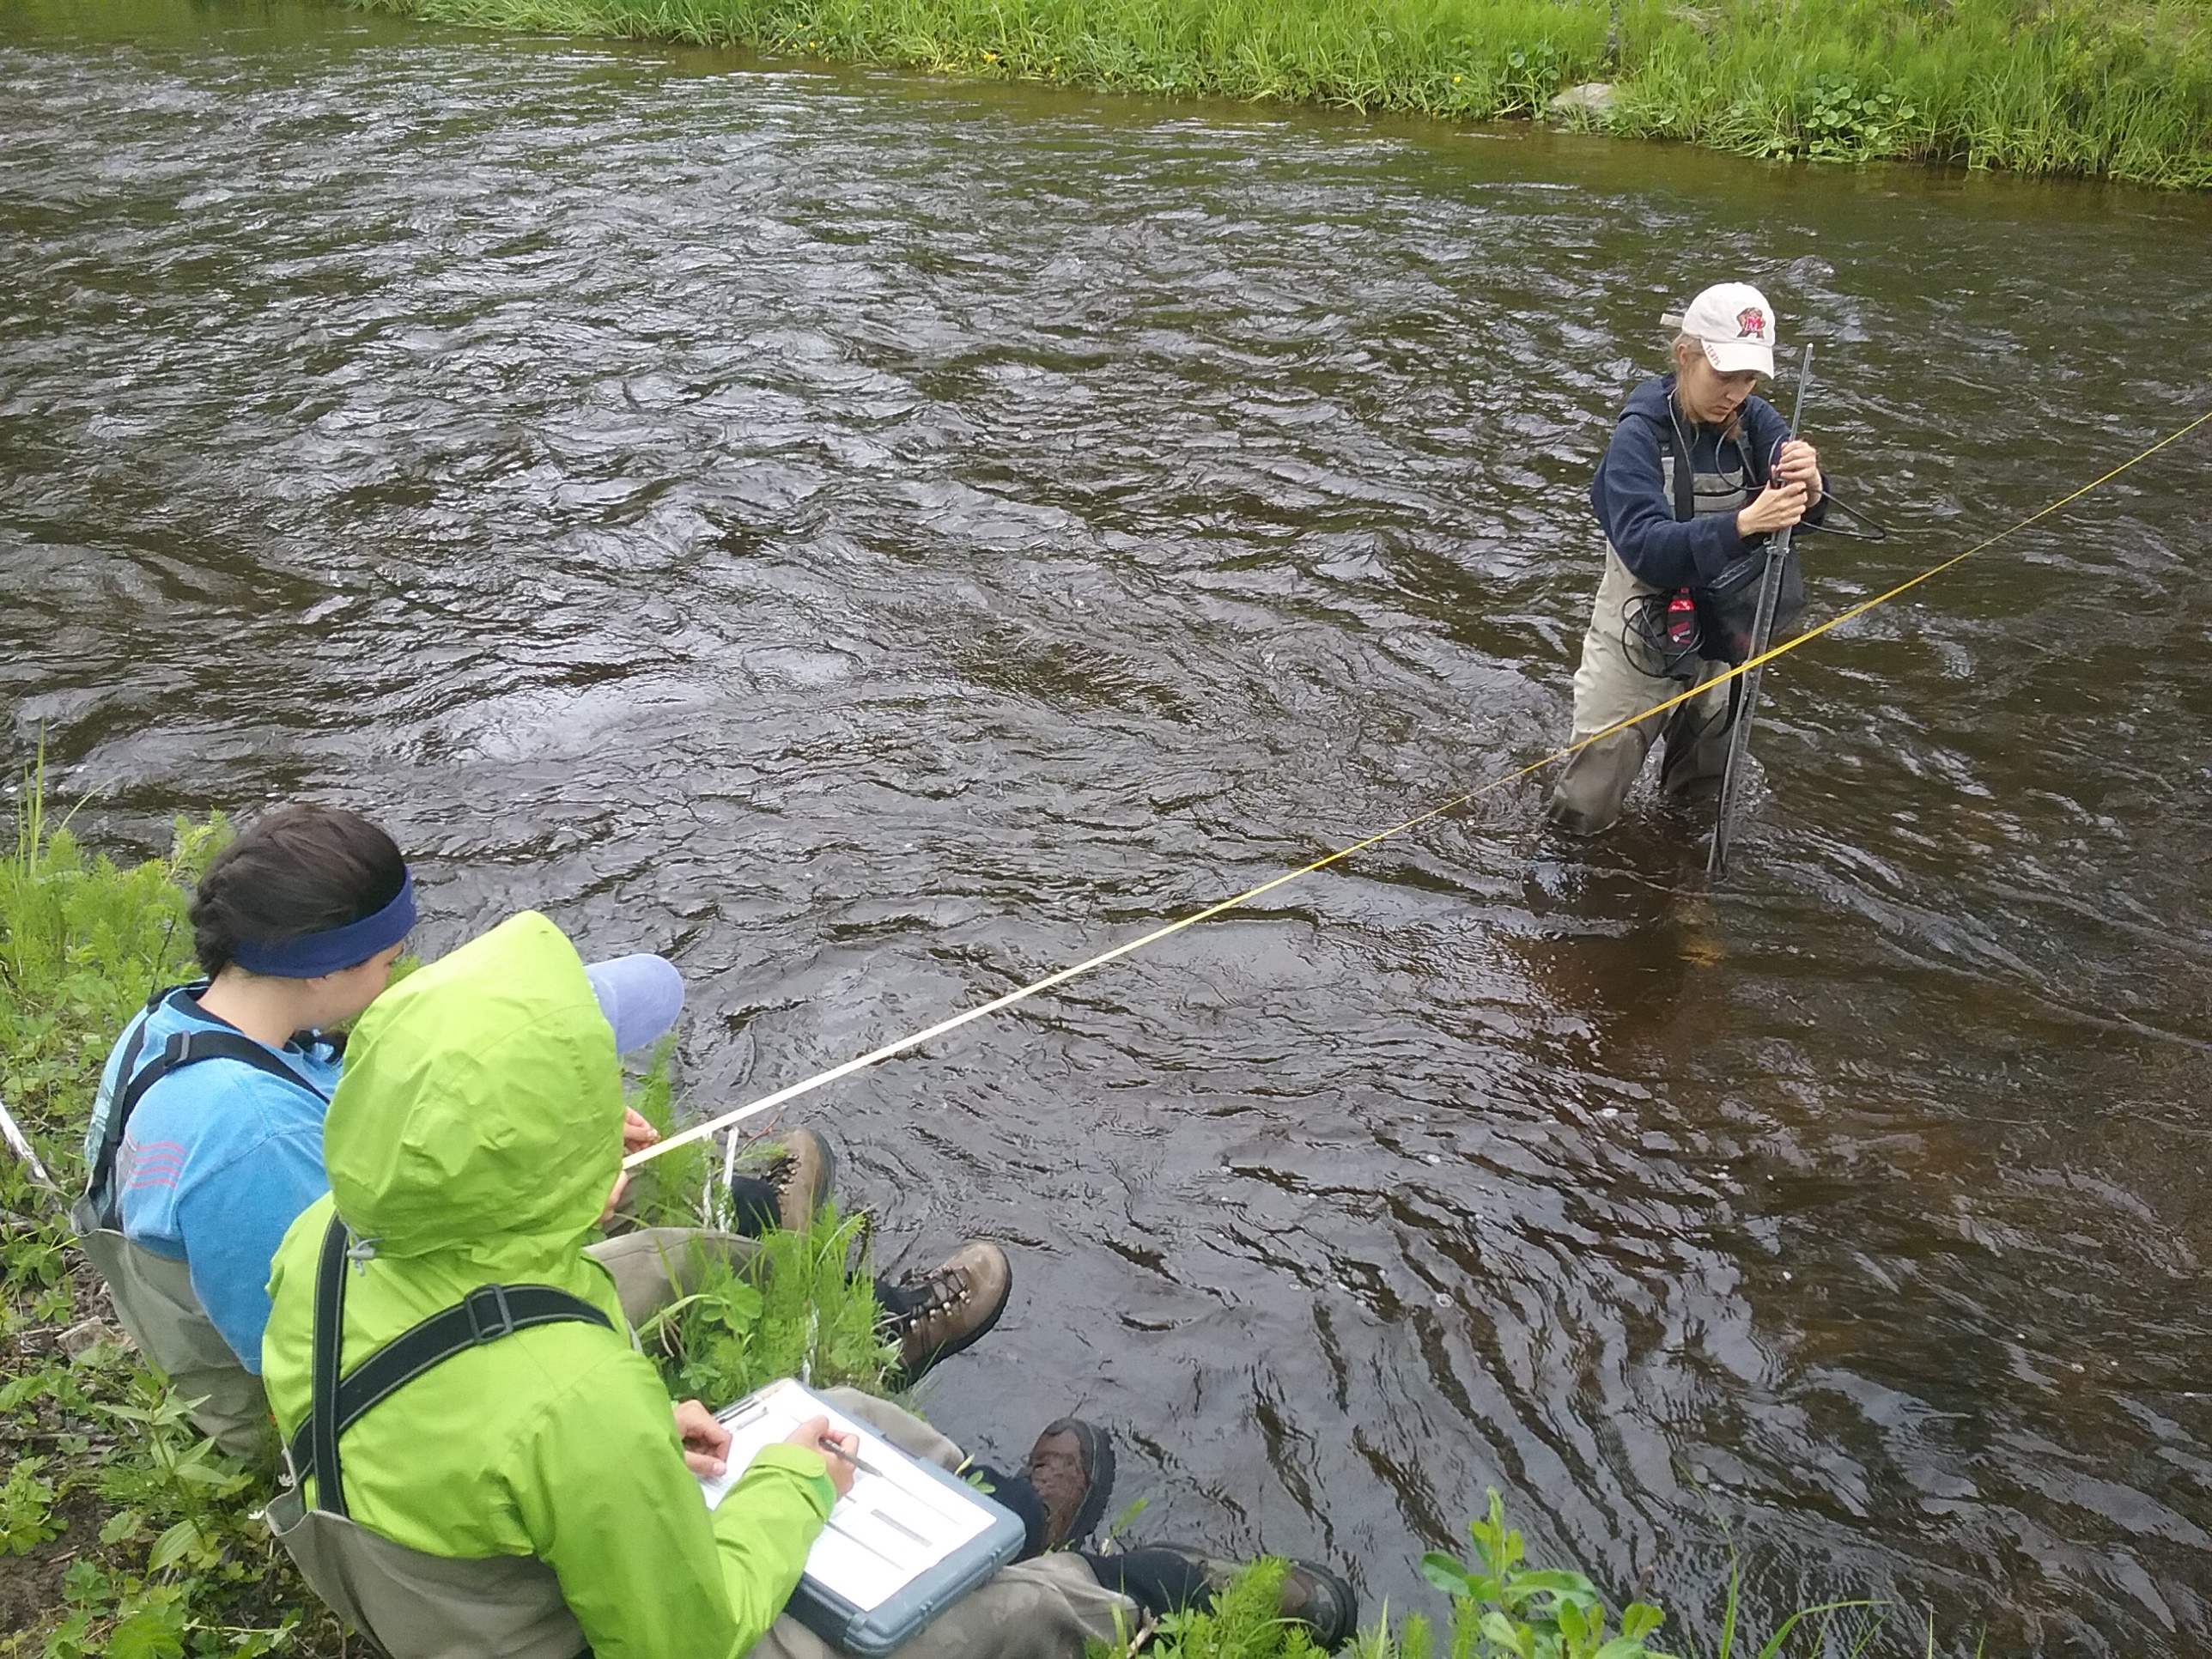 Anna Lowien, NOAA Hollings Scholar Class of 2017, collecting water velocity measurements of the salmon-bearing Stariski Creek in the Kenai Lowlands of Alaska. Also pictured: Megan Hazlett (left) and Ashley Bang (right), NOAA Hollings Scholars.